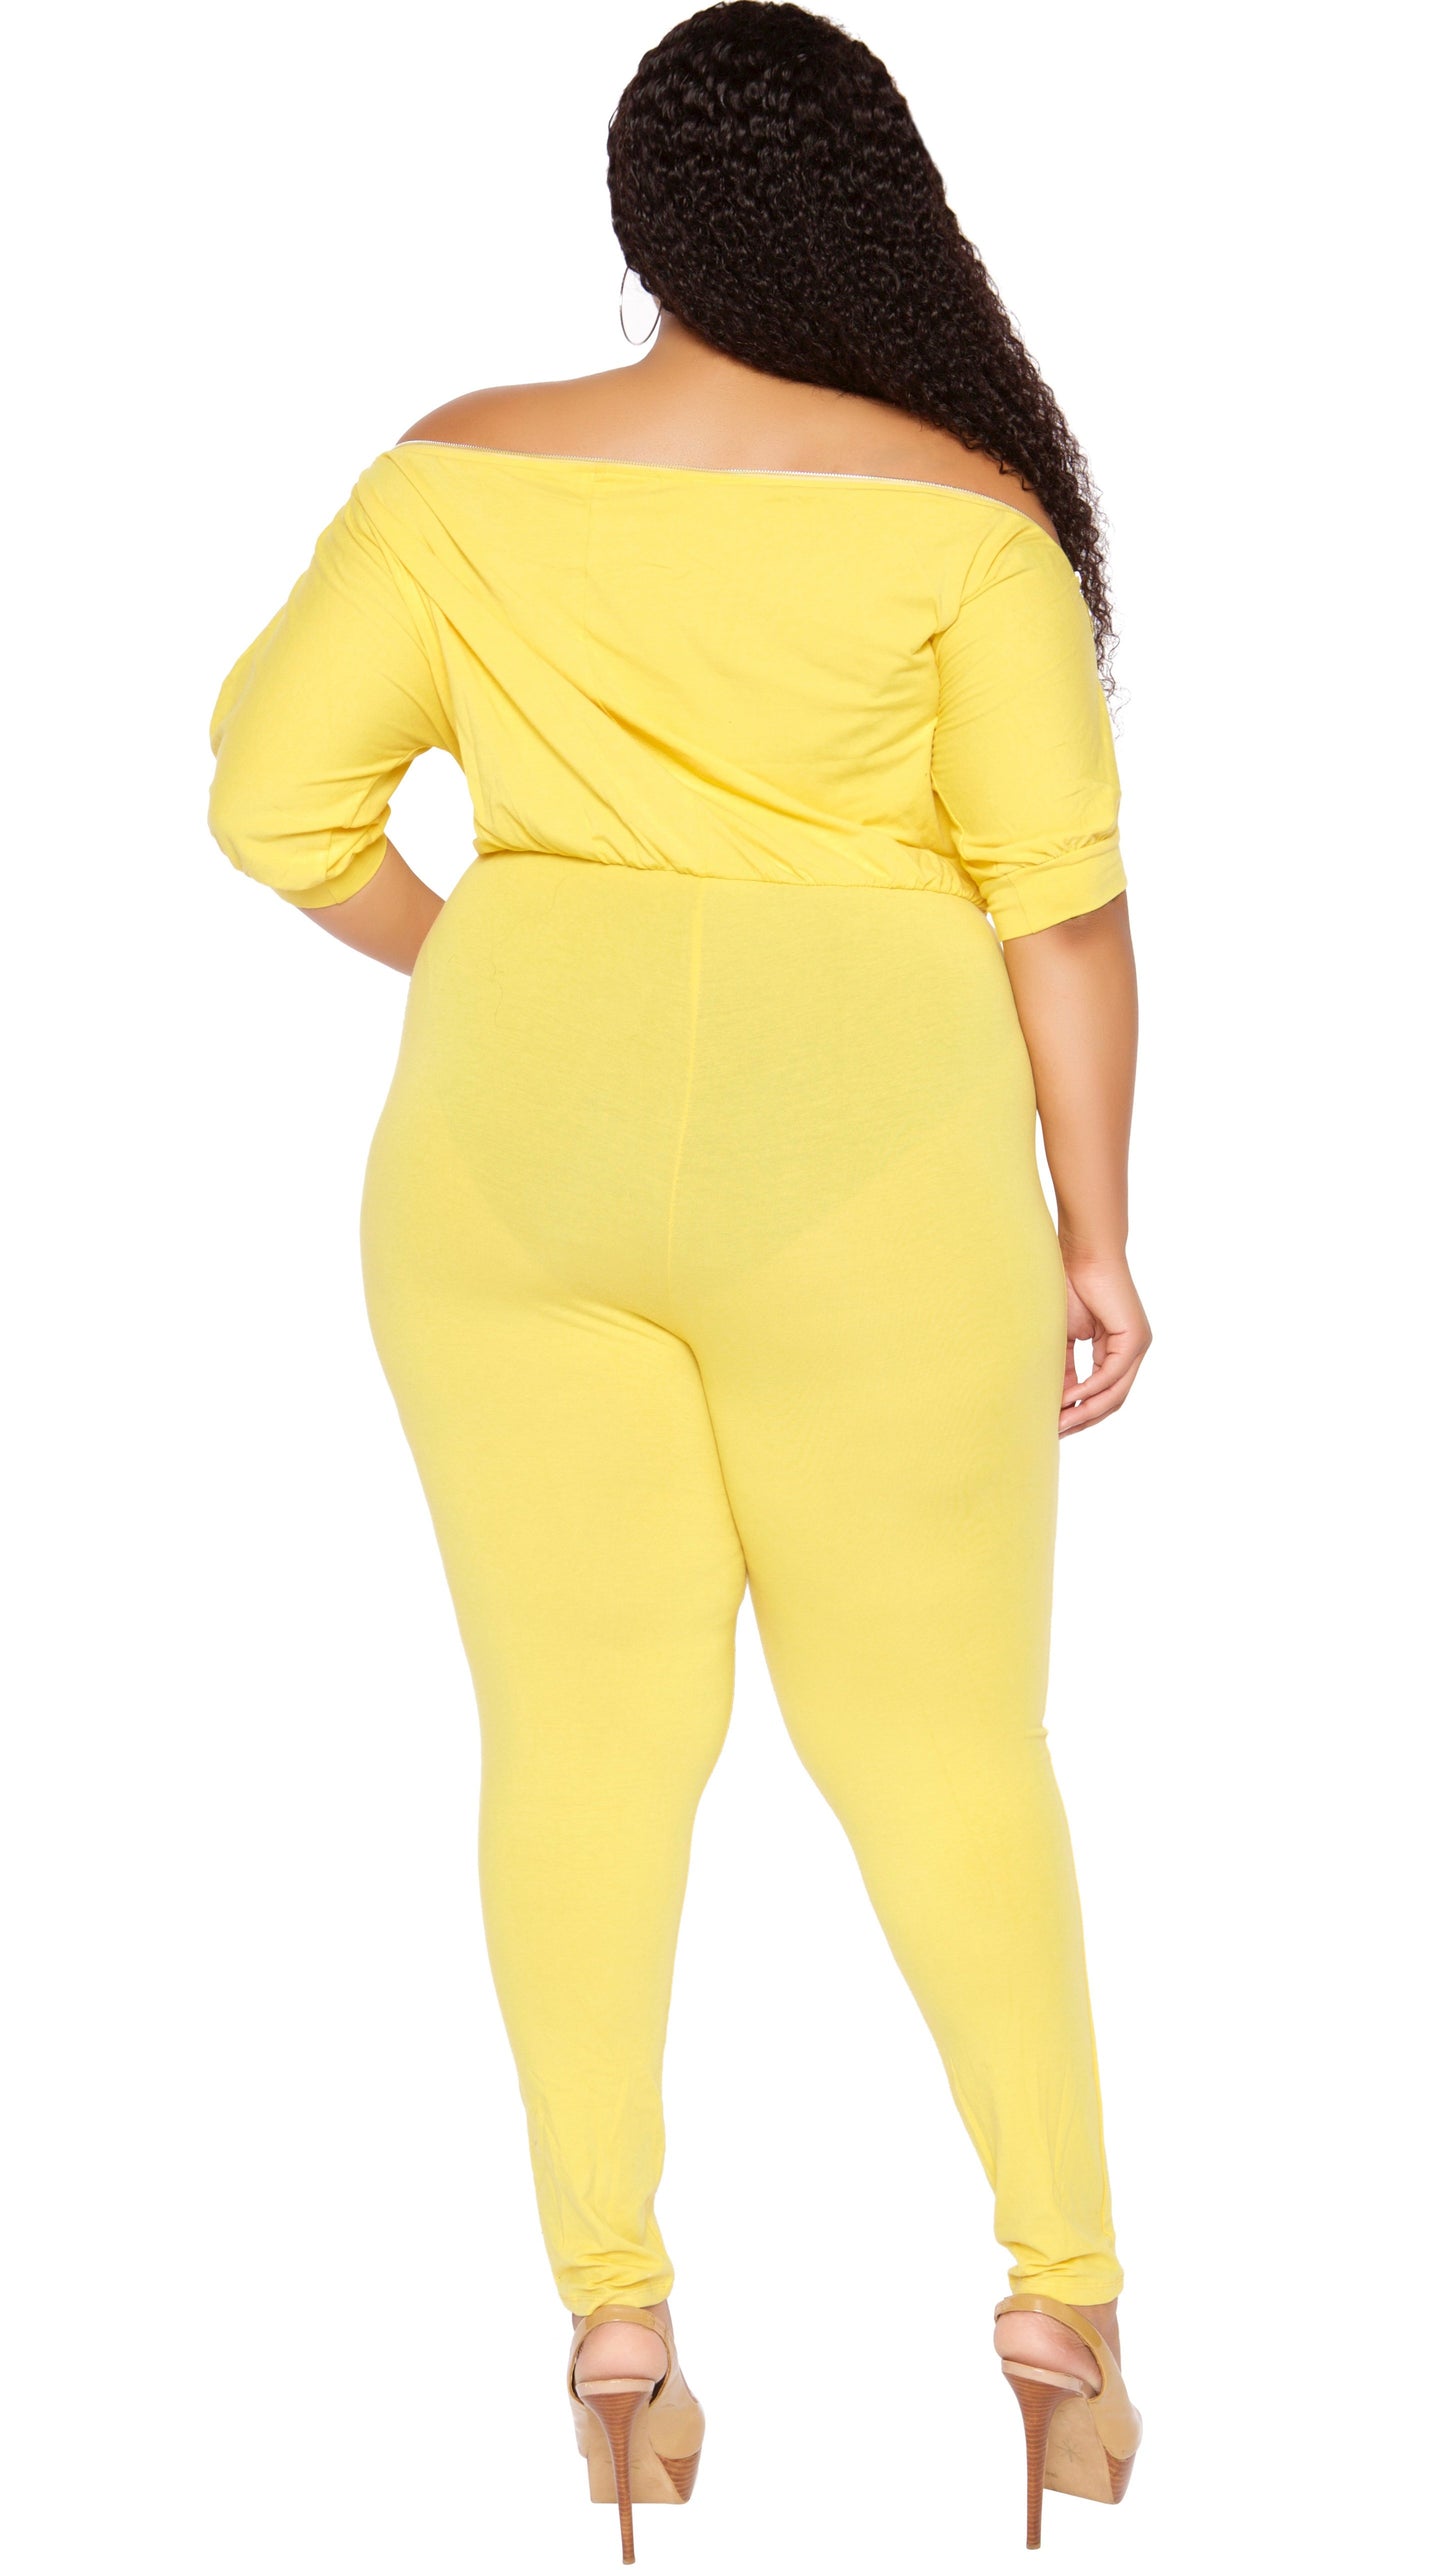 Lemon Ice Jumper (Yellow)-Jumpers-Boughie-Boughie